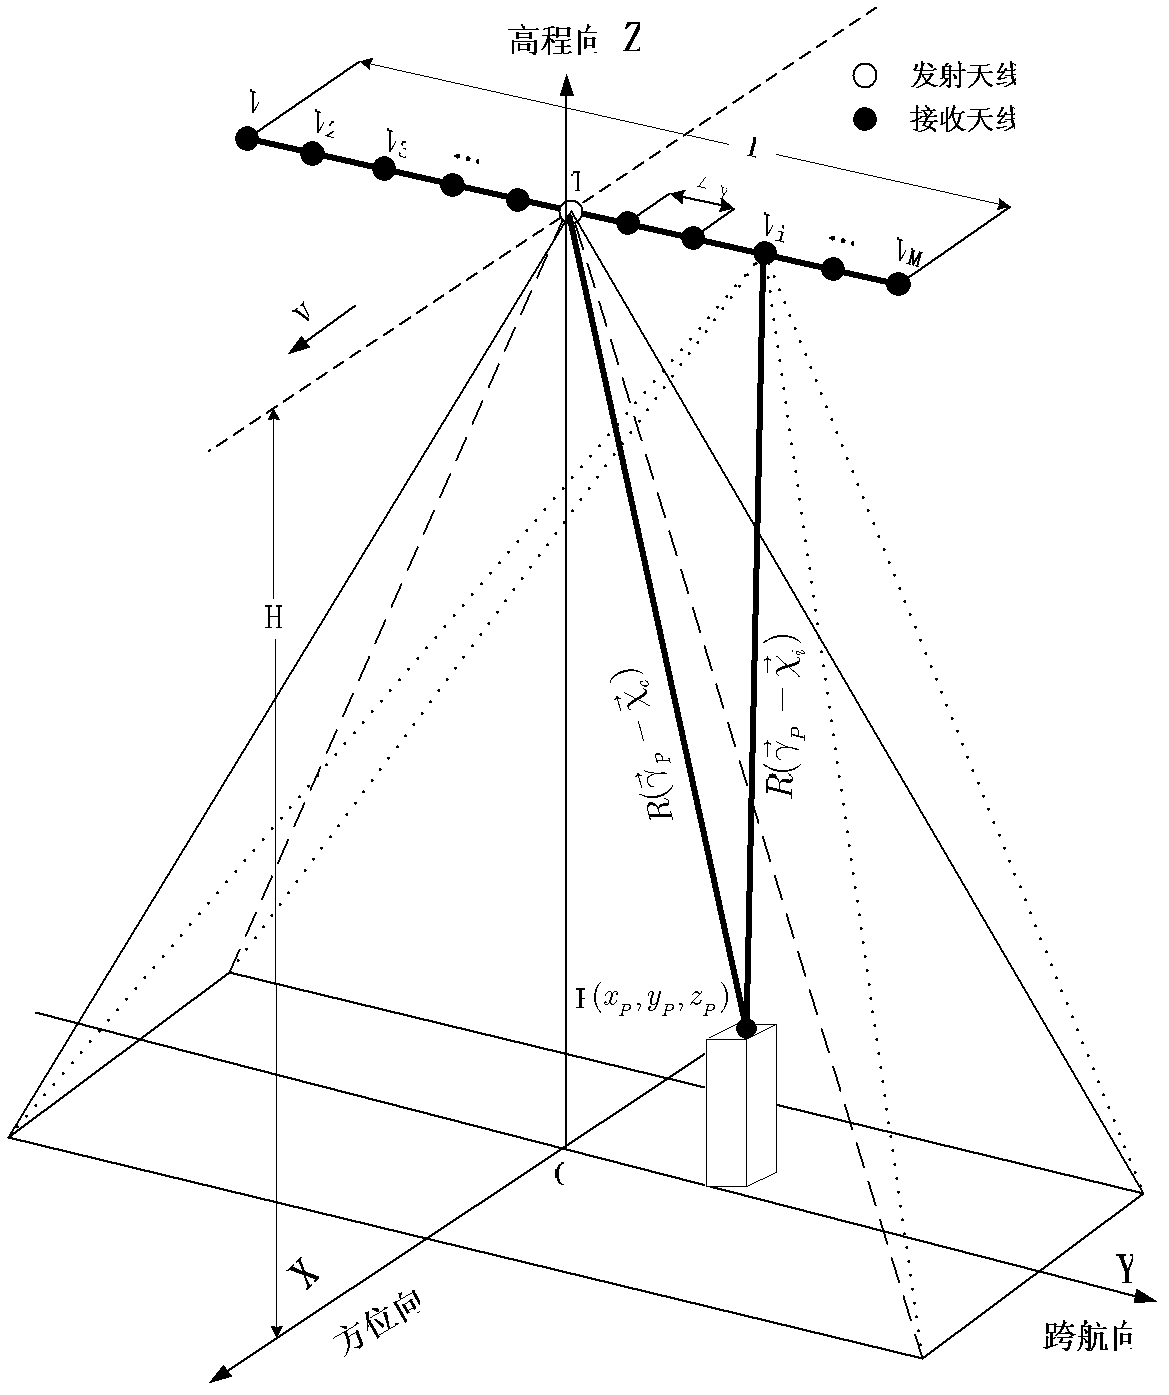 Three-dimensional microwave imaging method for correcting multi-channel amplitude-phase error